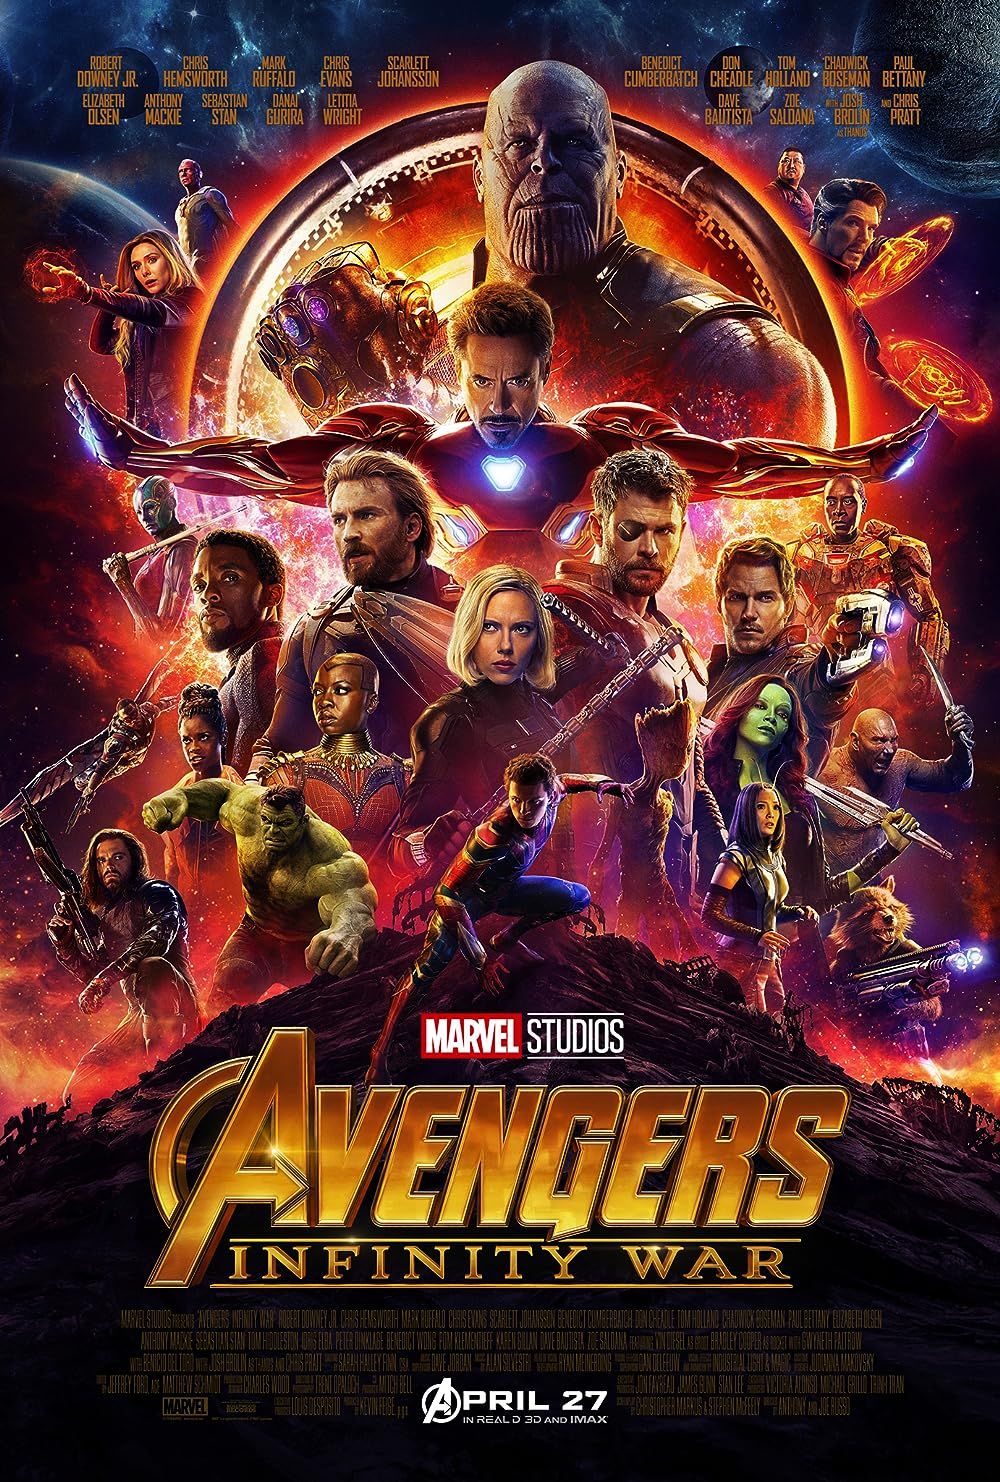 The cast of Avengers Infinity War in their hero stances on the movie poster